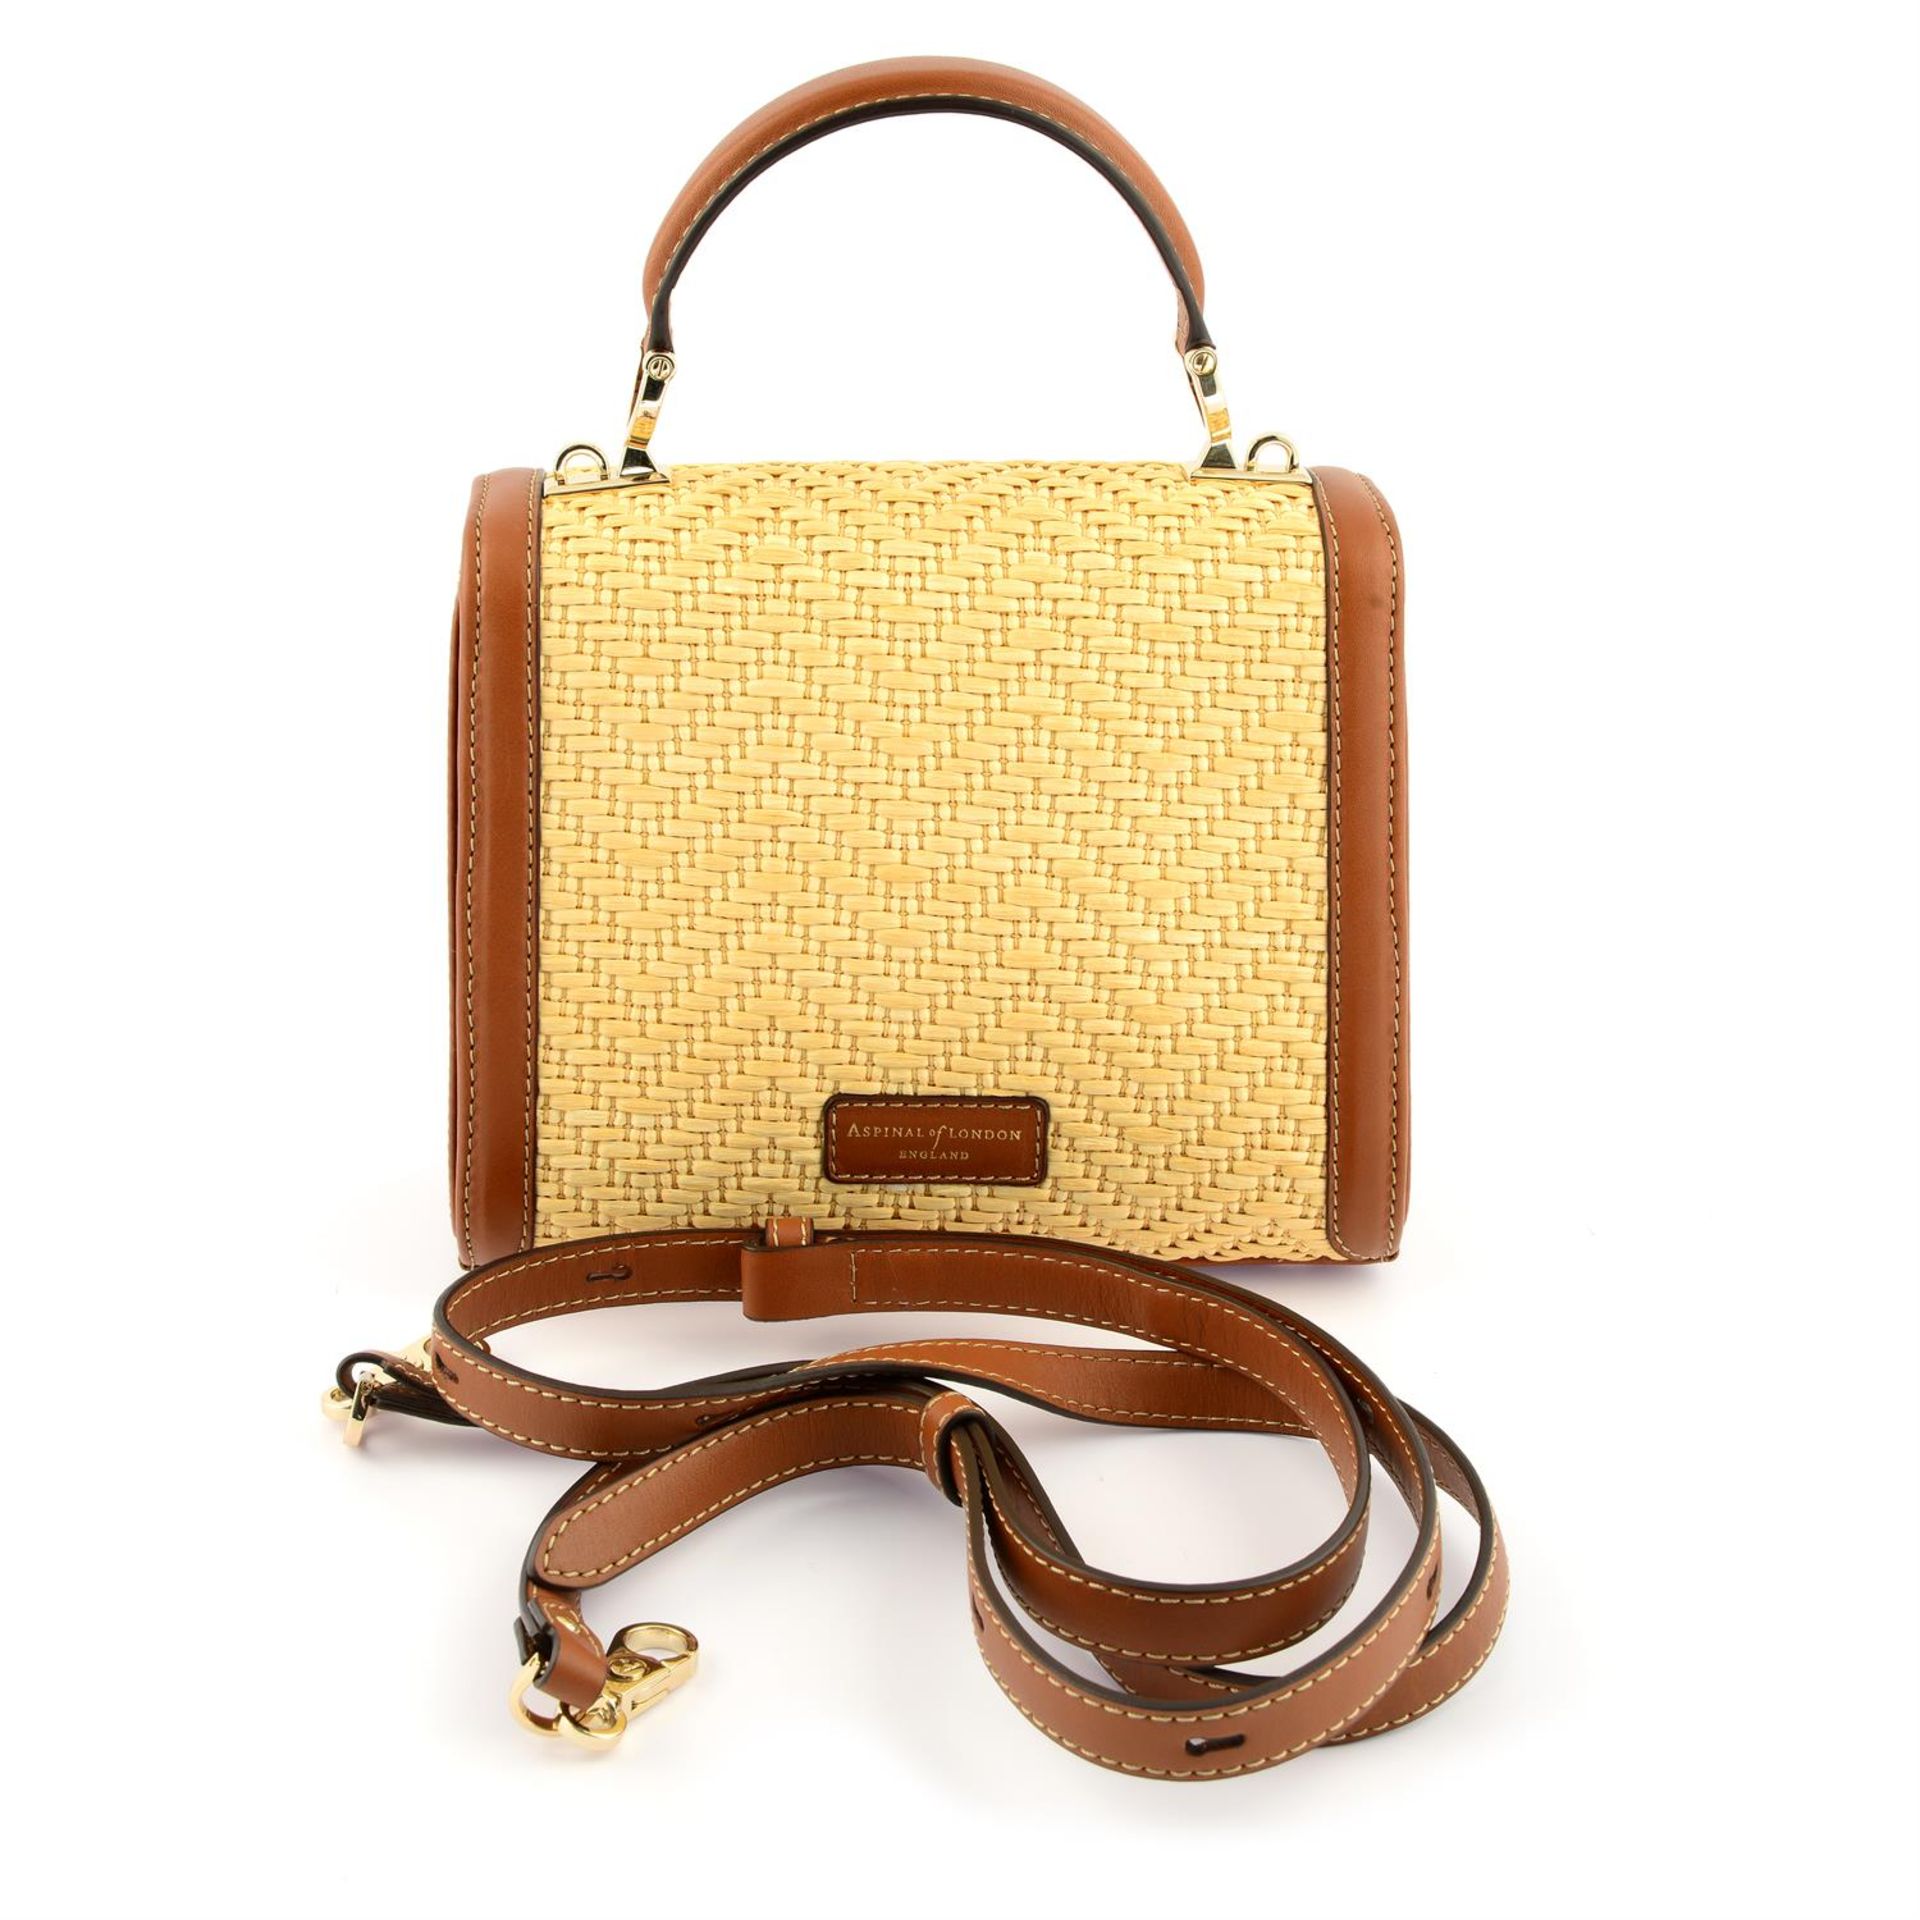 ASPINAL OF LONDON - a brown raffia and leather Mayfair Midi tote bag. - Image 2 of 4